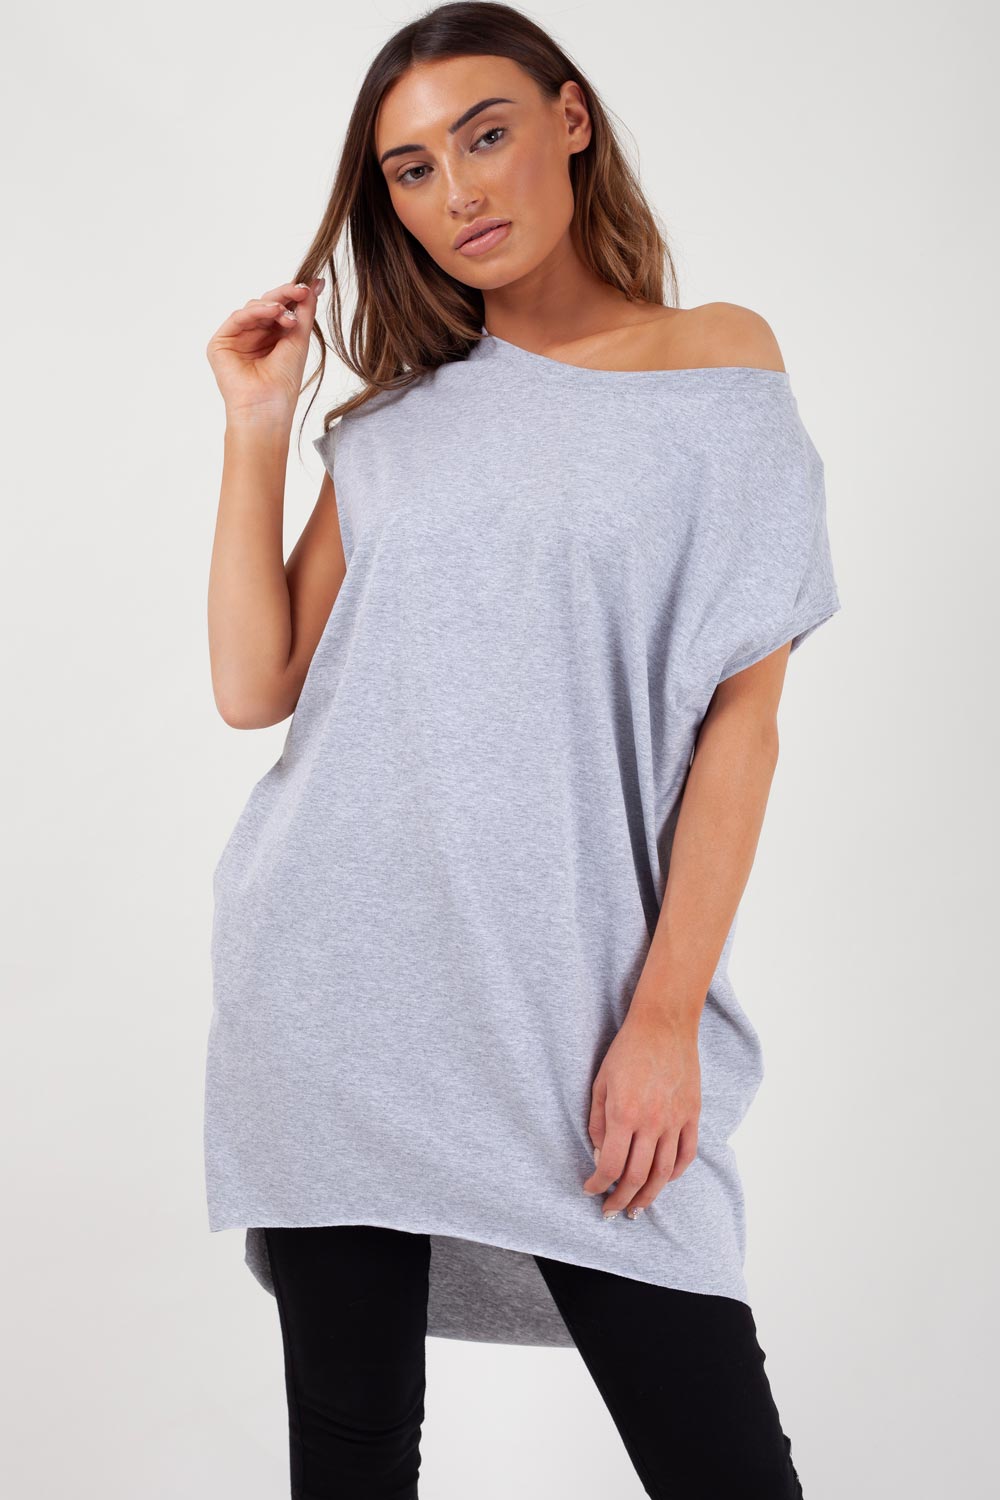 made in italy oversized top womens 